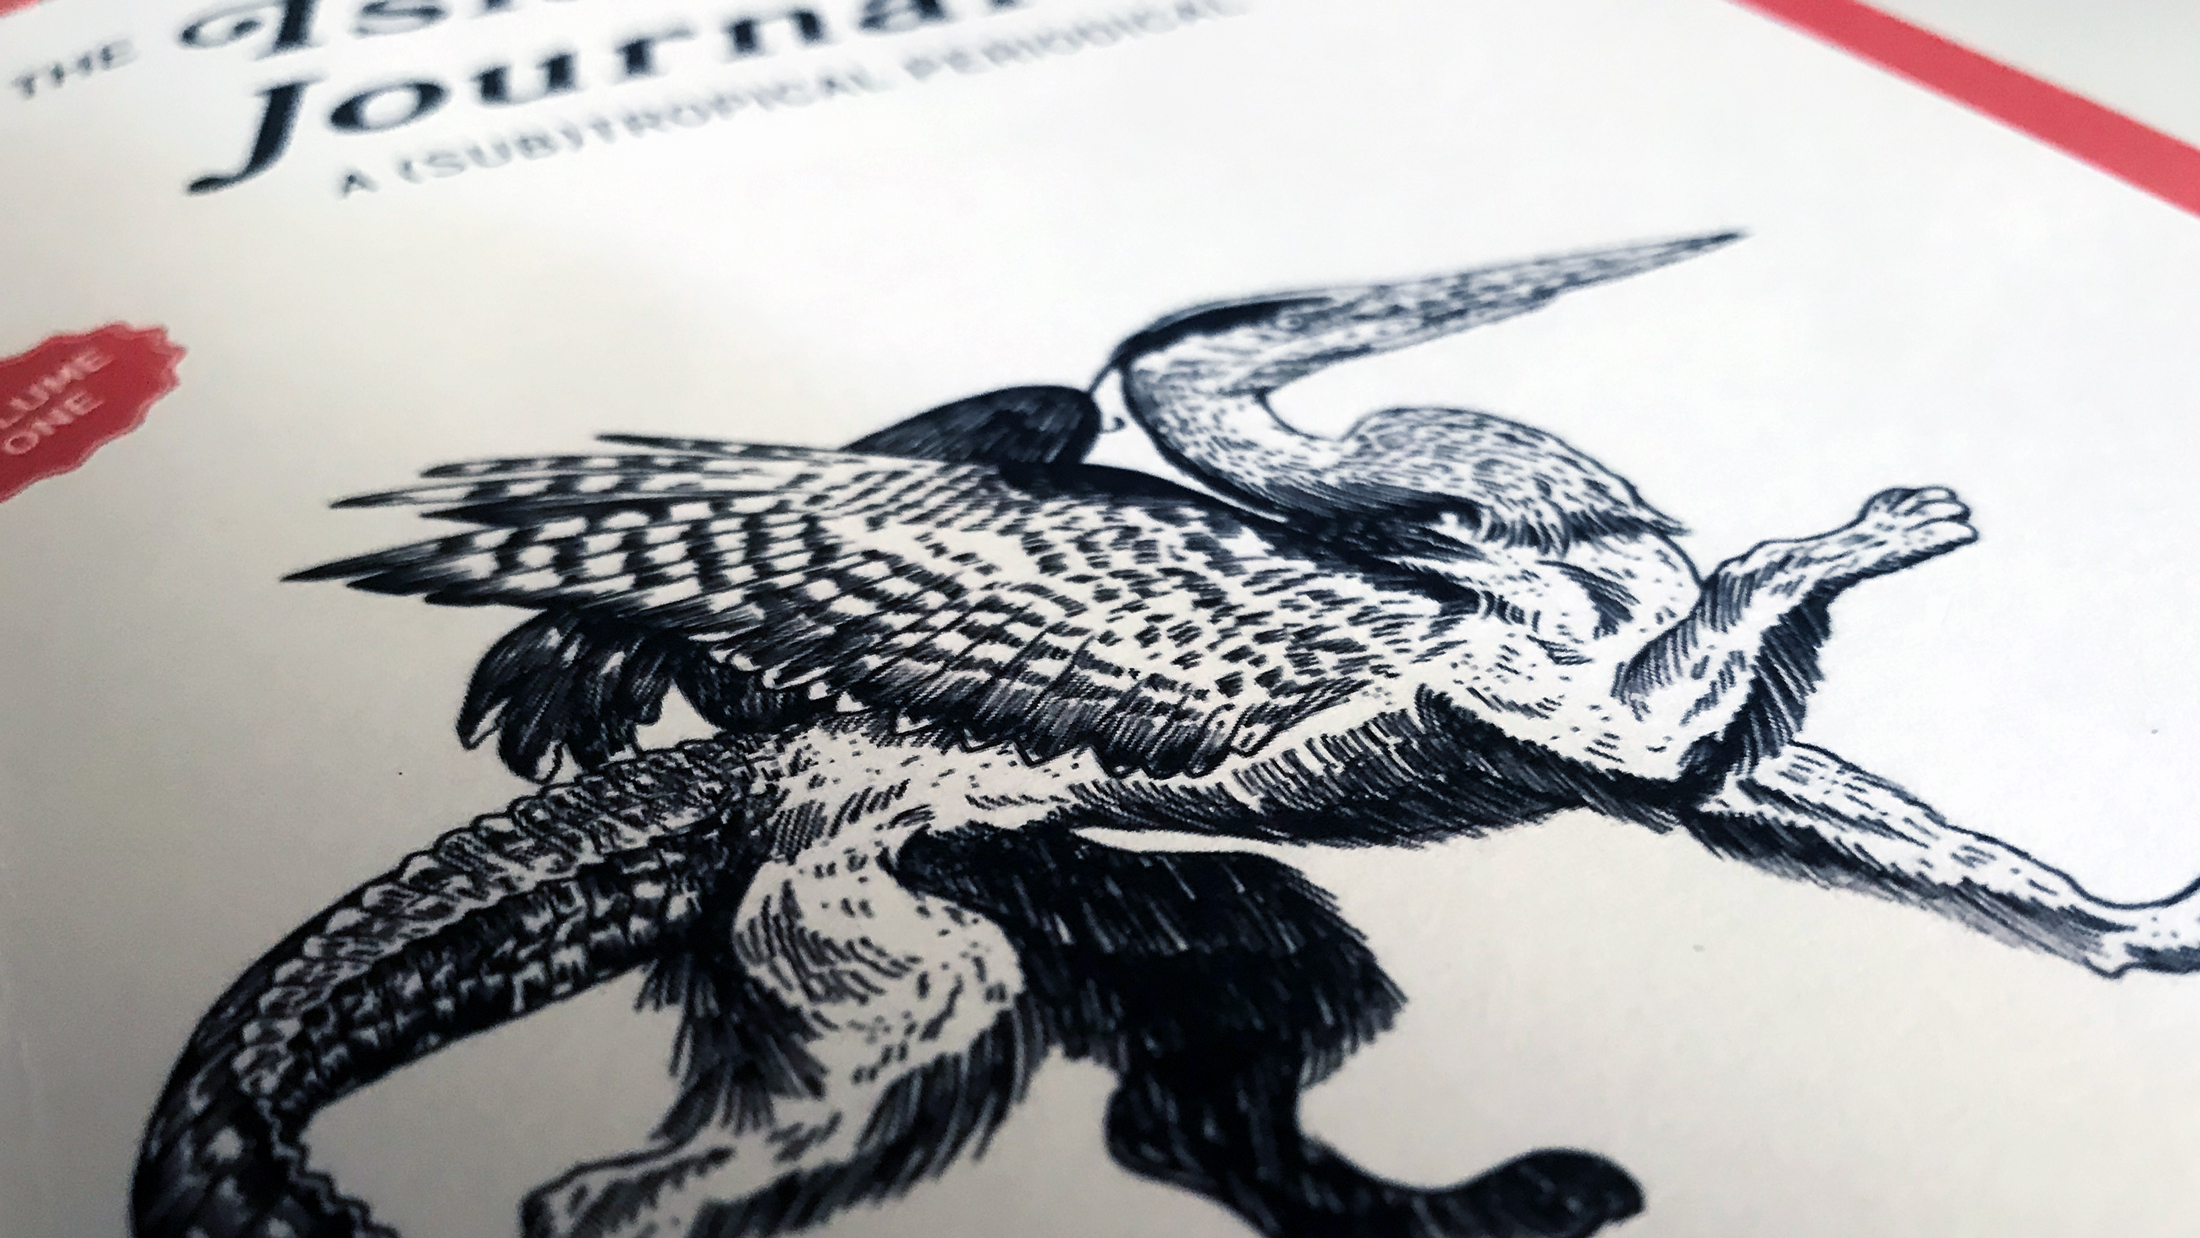 Detail of illustrator Russel Beans' Everglade Griffin on the cover of The Islandia Journal: A (Sub)Tropical Periodical